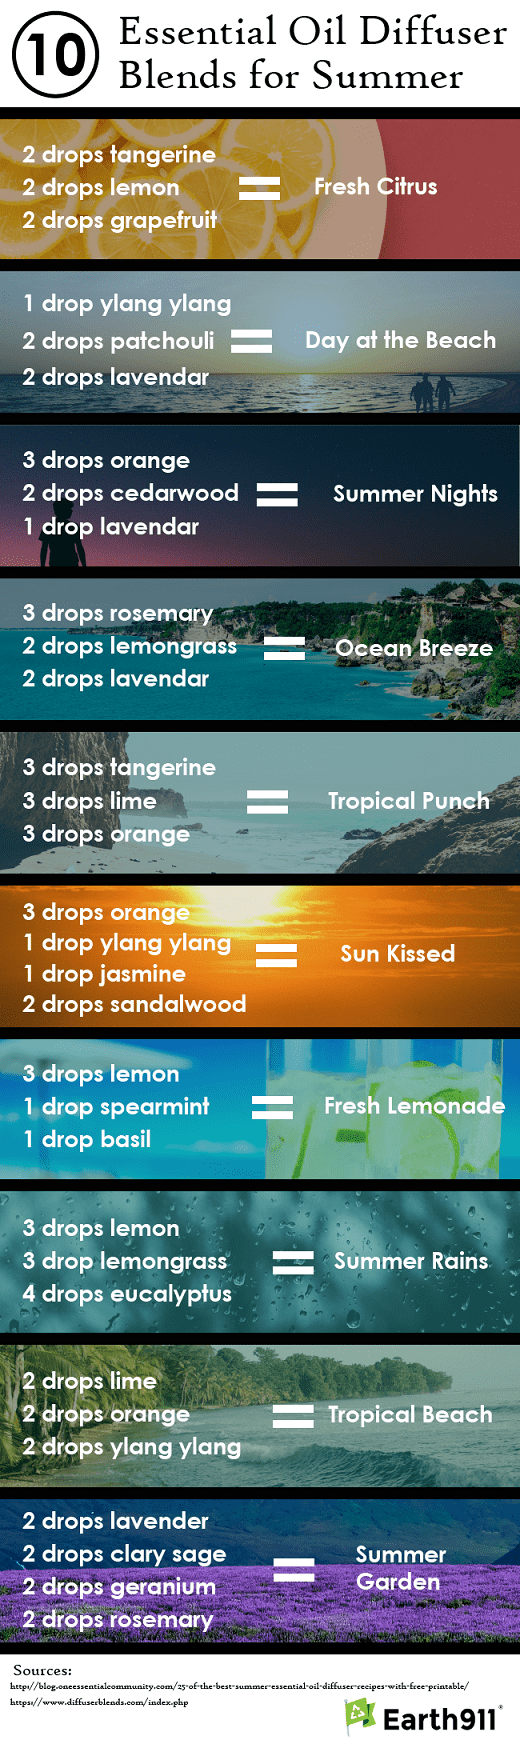 10 Essential Oil Diffuser Blends for Summer